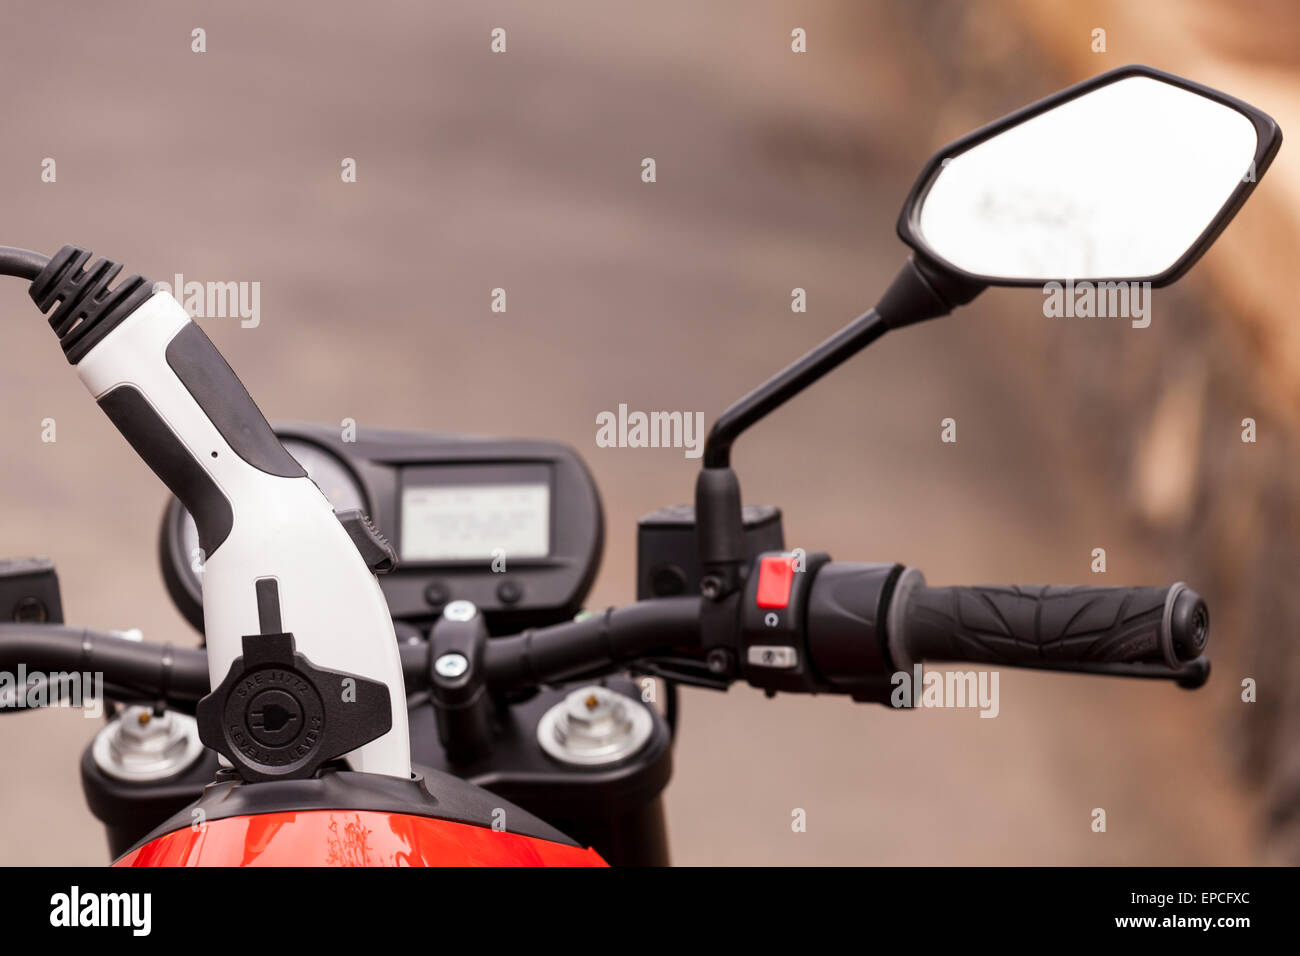 Electric motorcycle plugged in for recharging, Stock Photo